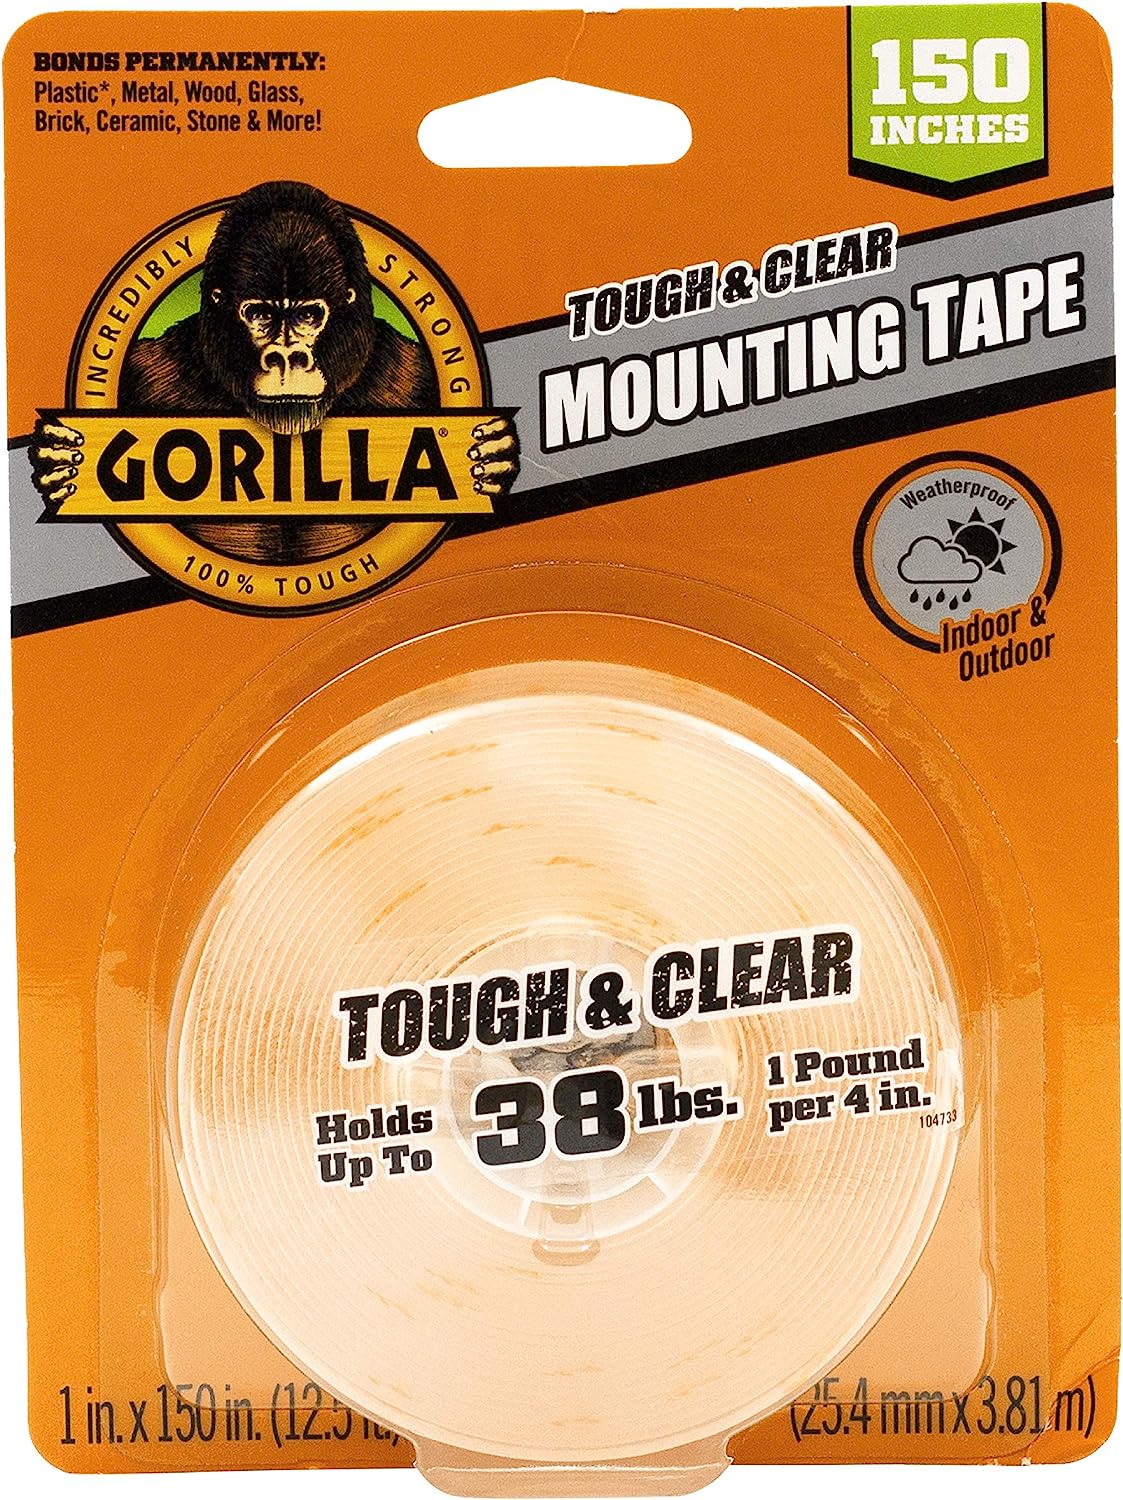 double sided adhesive tape review